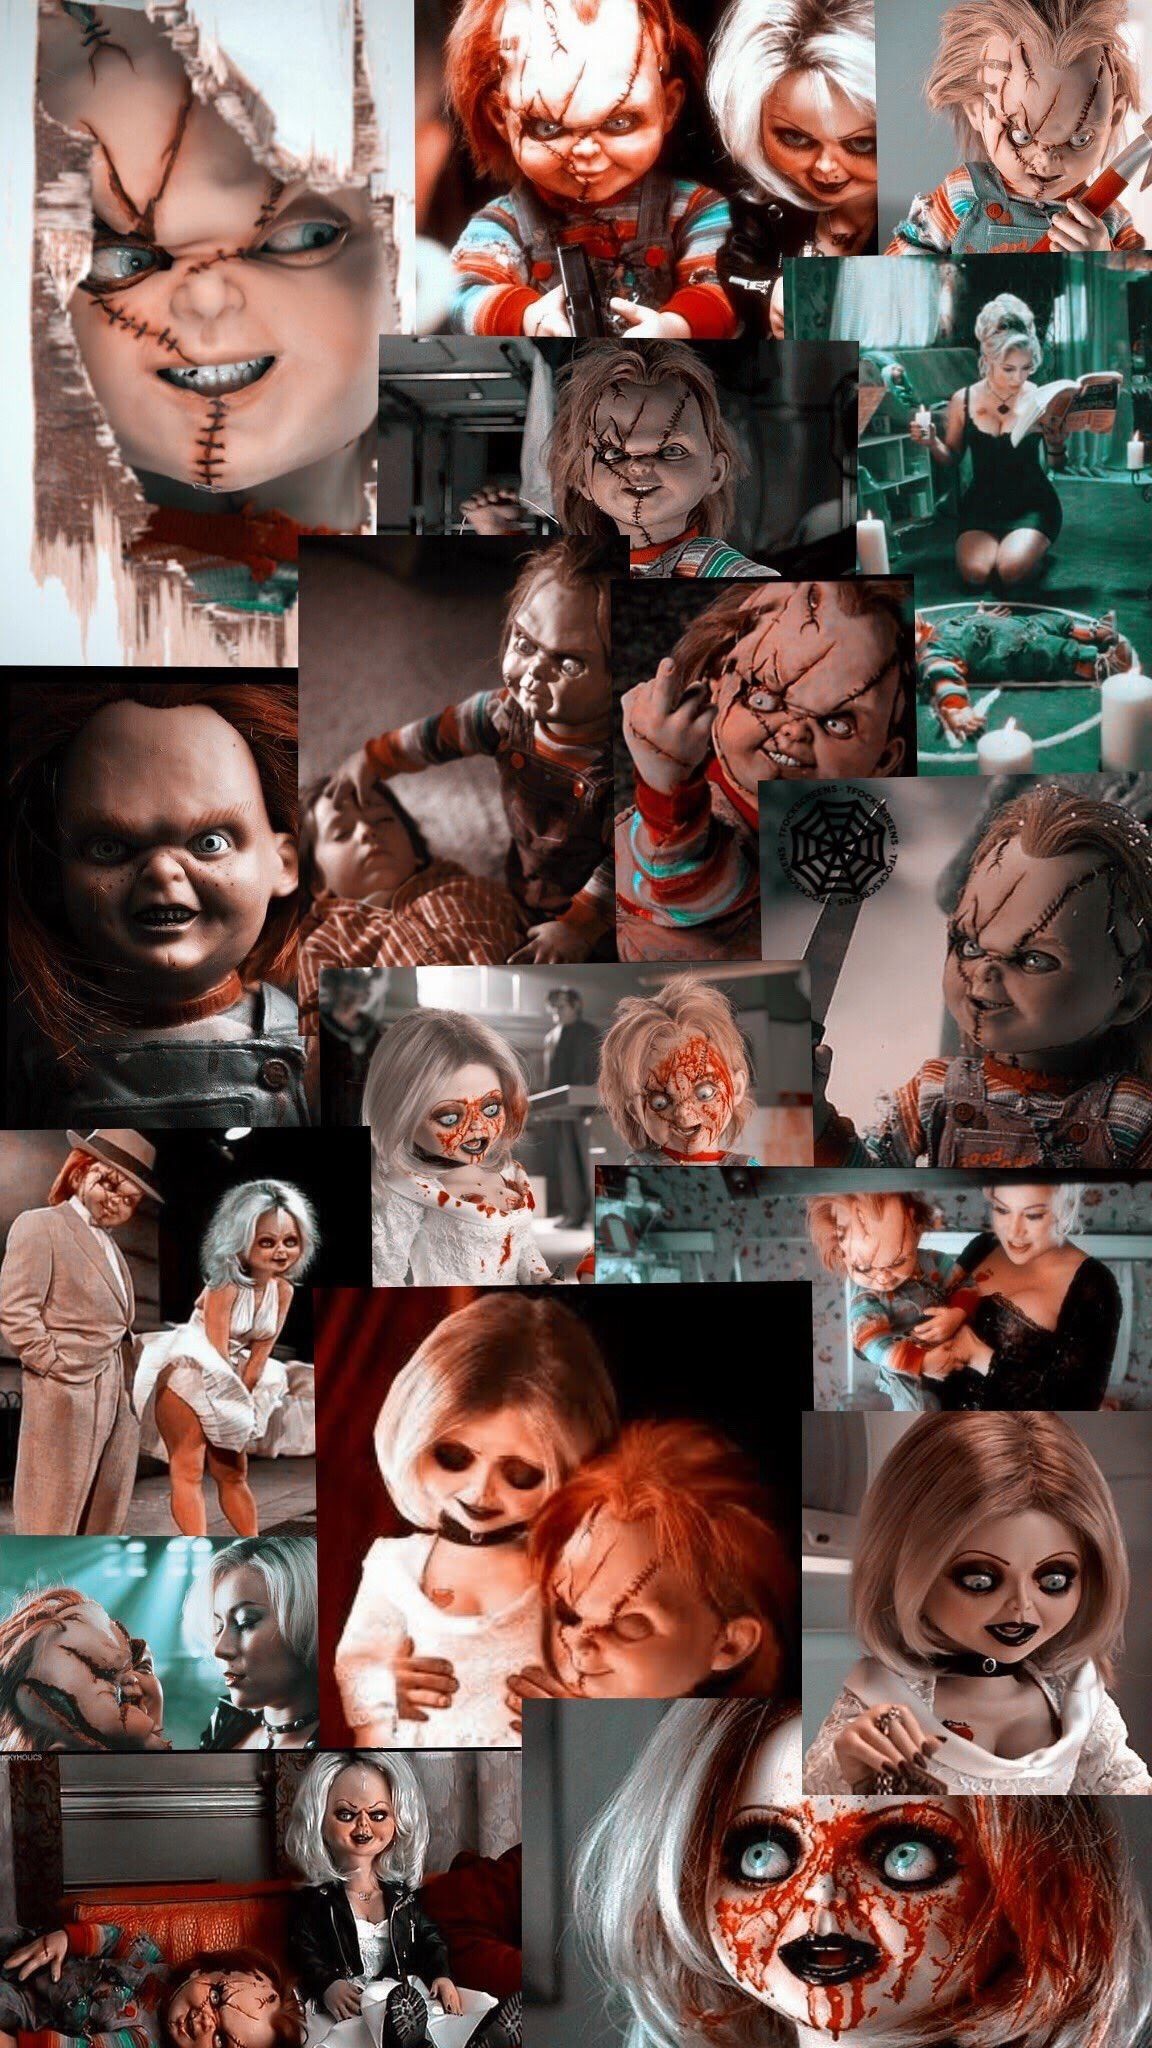 Bride Of Chucky wallpaper by ShadEO9  Download on ZEDGE  f73d